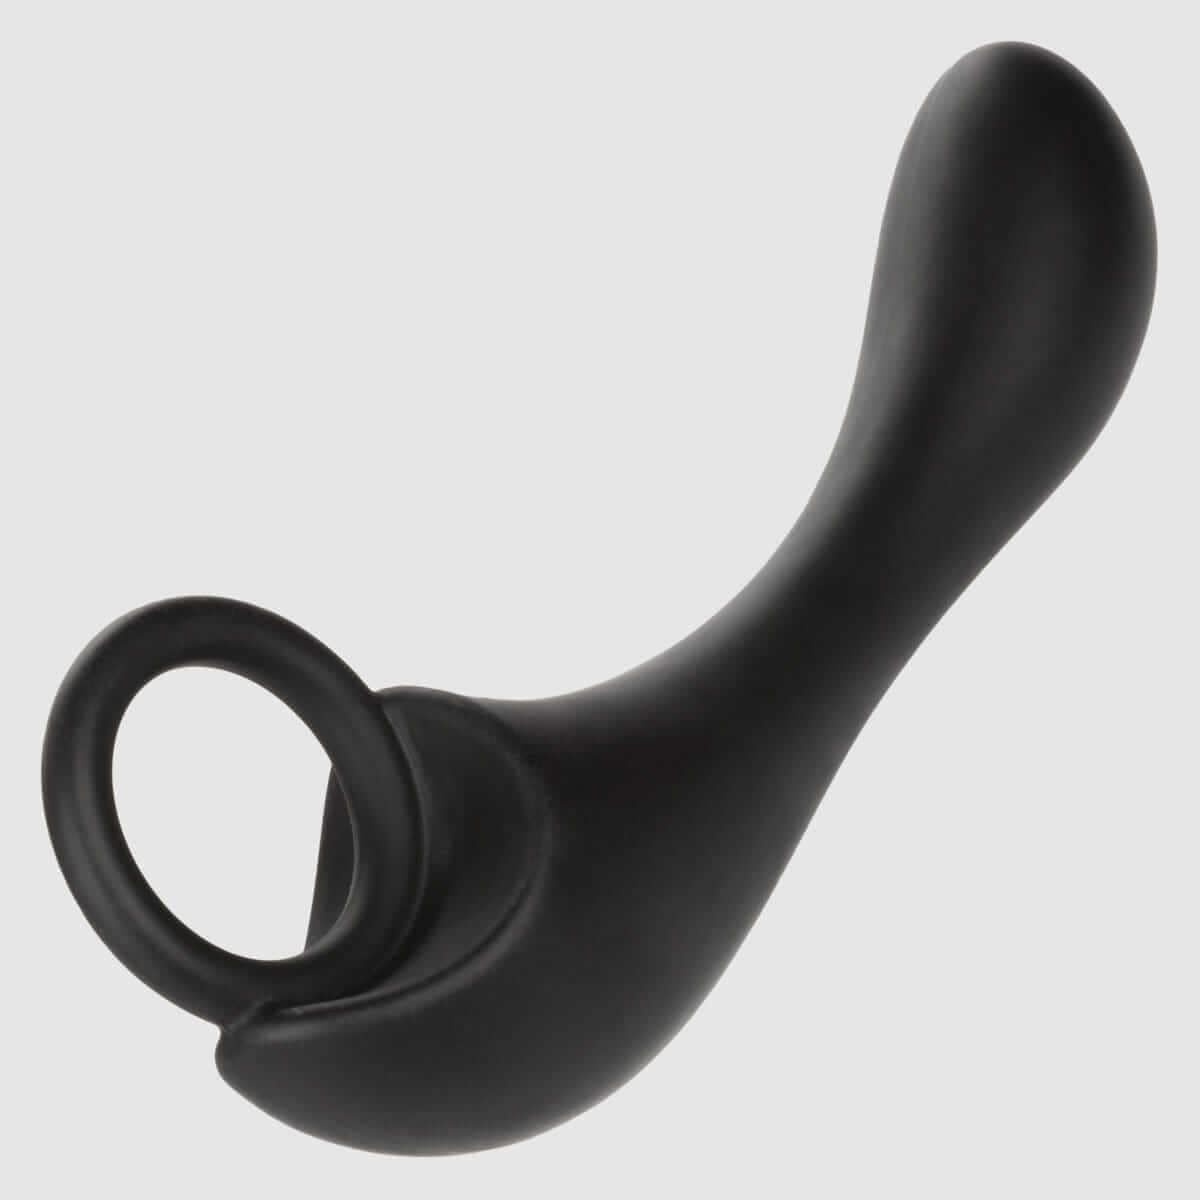 Dr. Joel Kaplan Silicone Prostate Locater - Thorn & Feather Sex Toy Canada